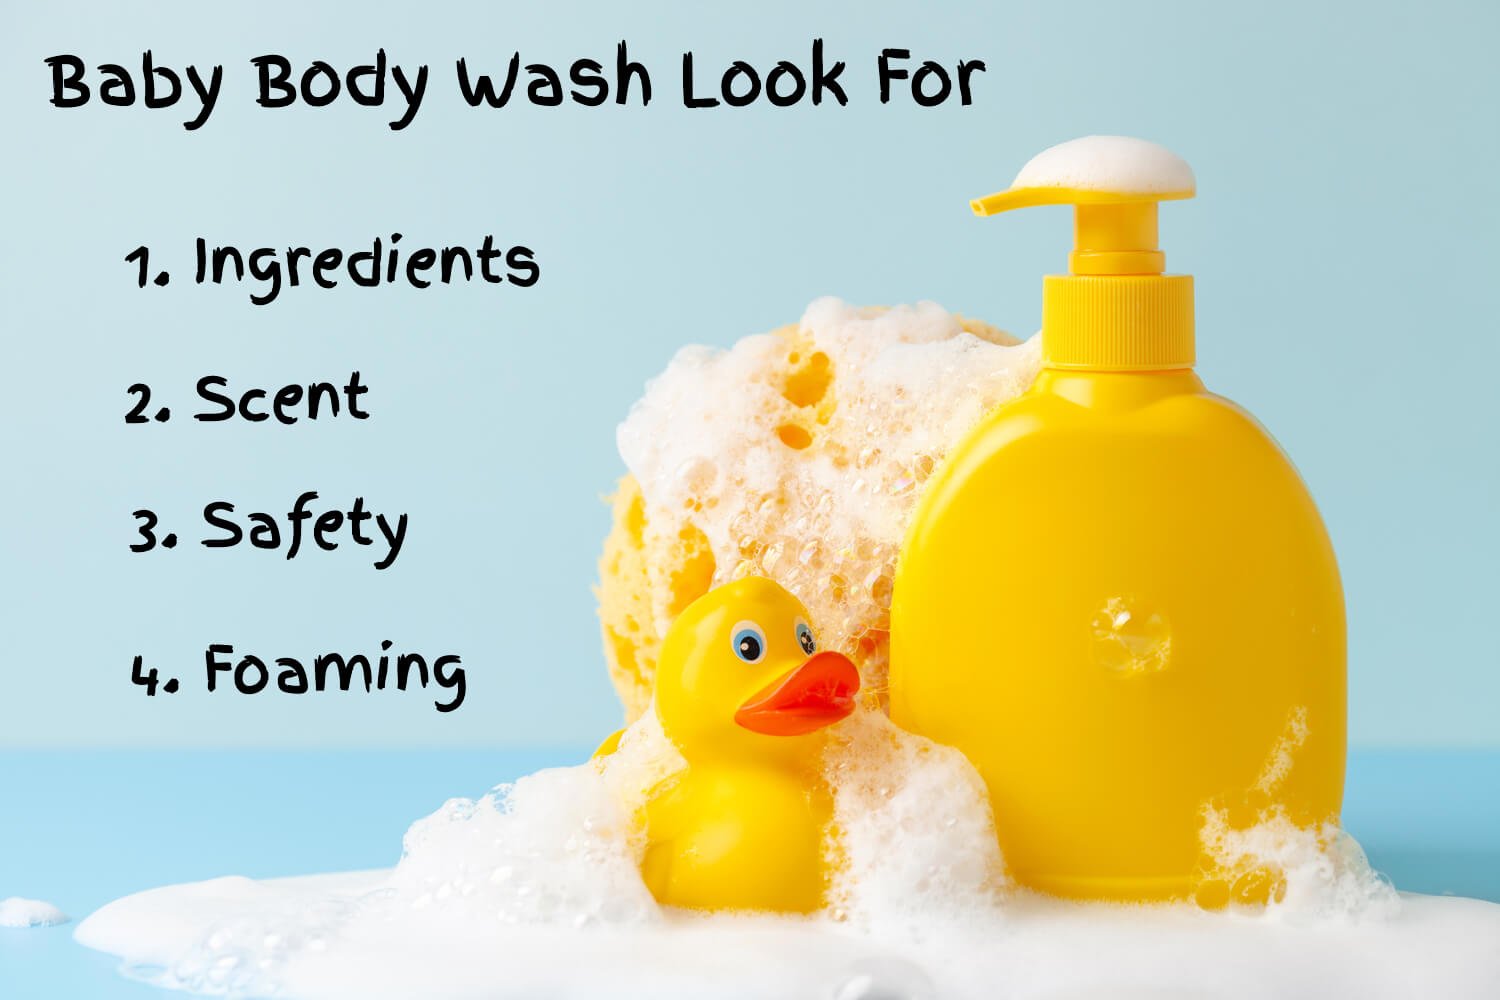 What to Look For in a Baby Body Wash